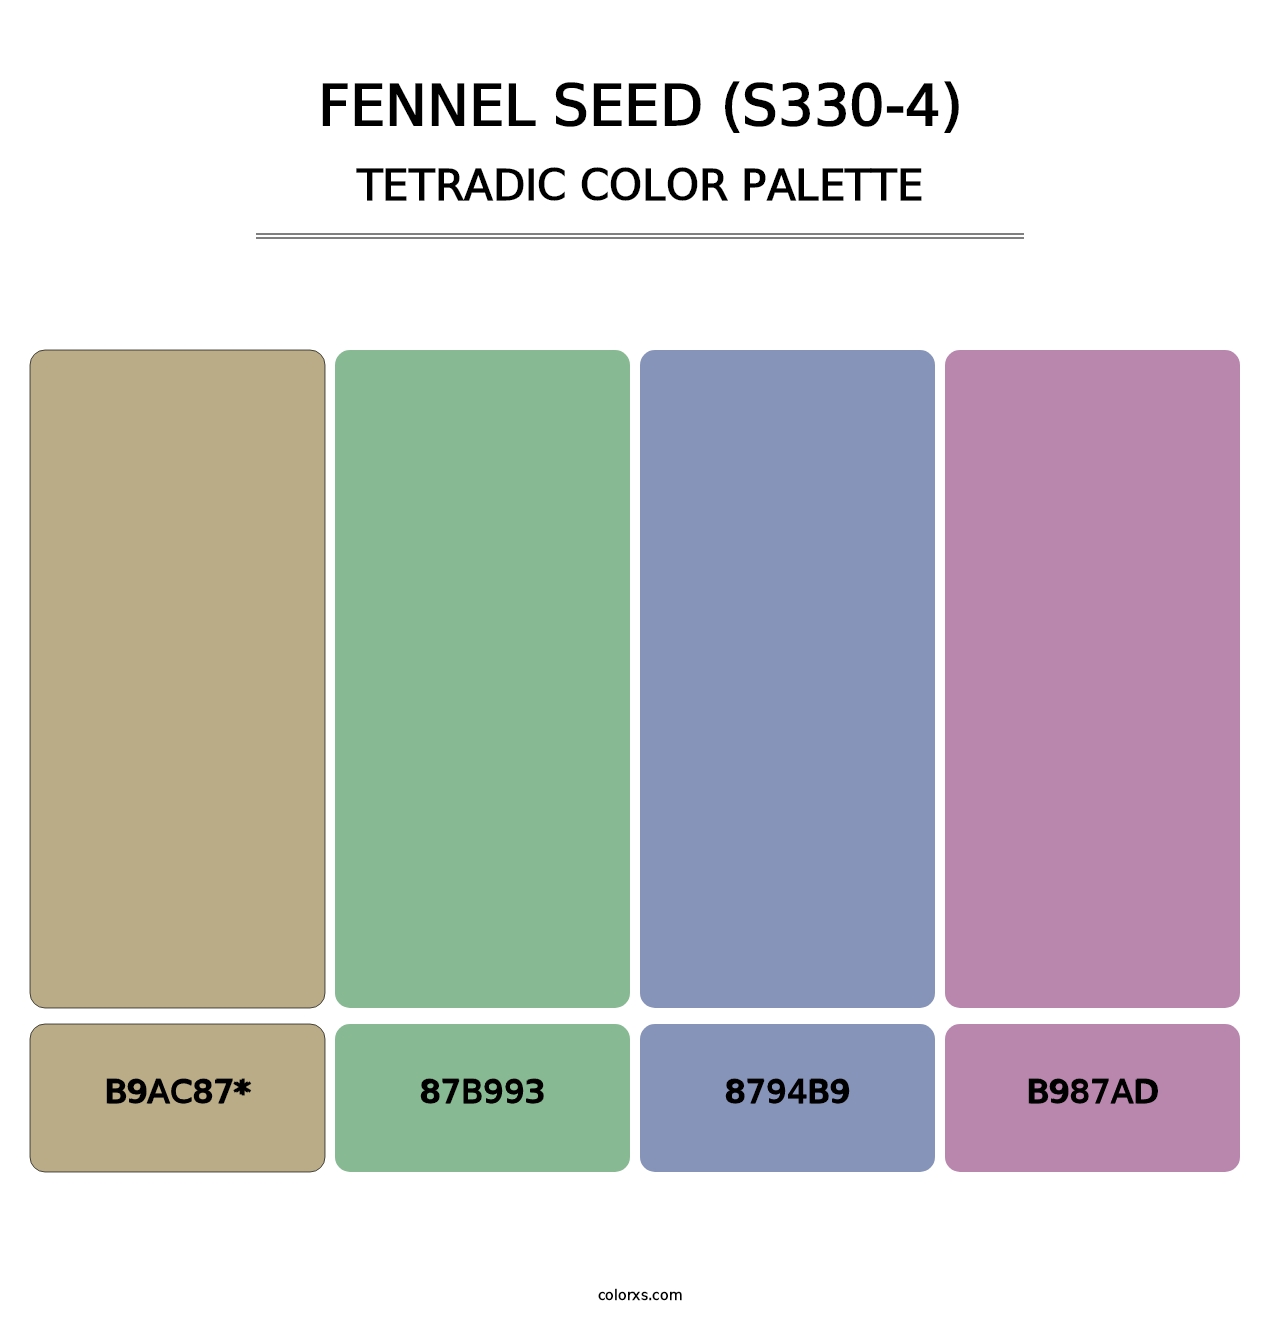 Fennel Seed (S330-4) - Tetradic Color Palette